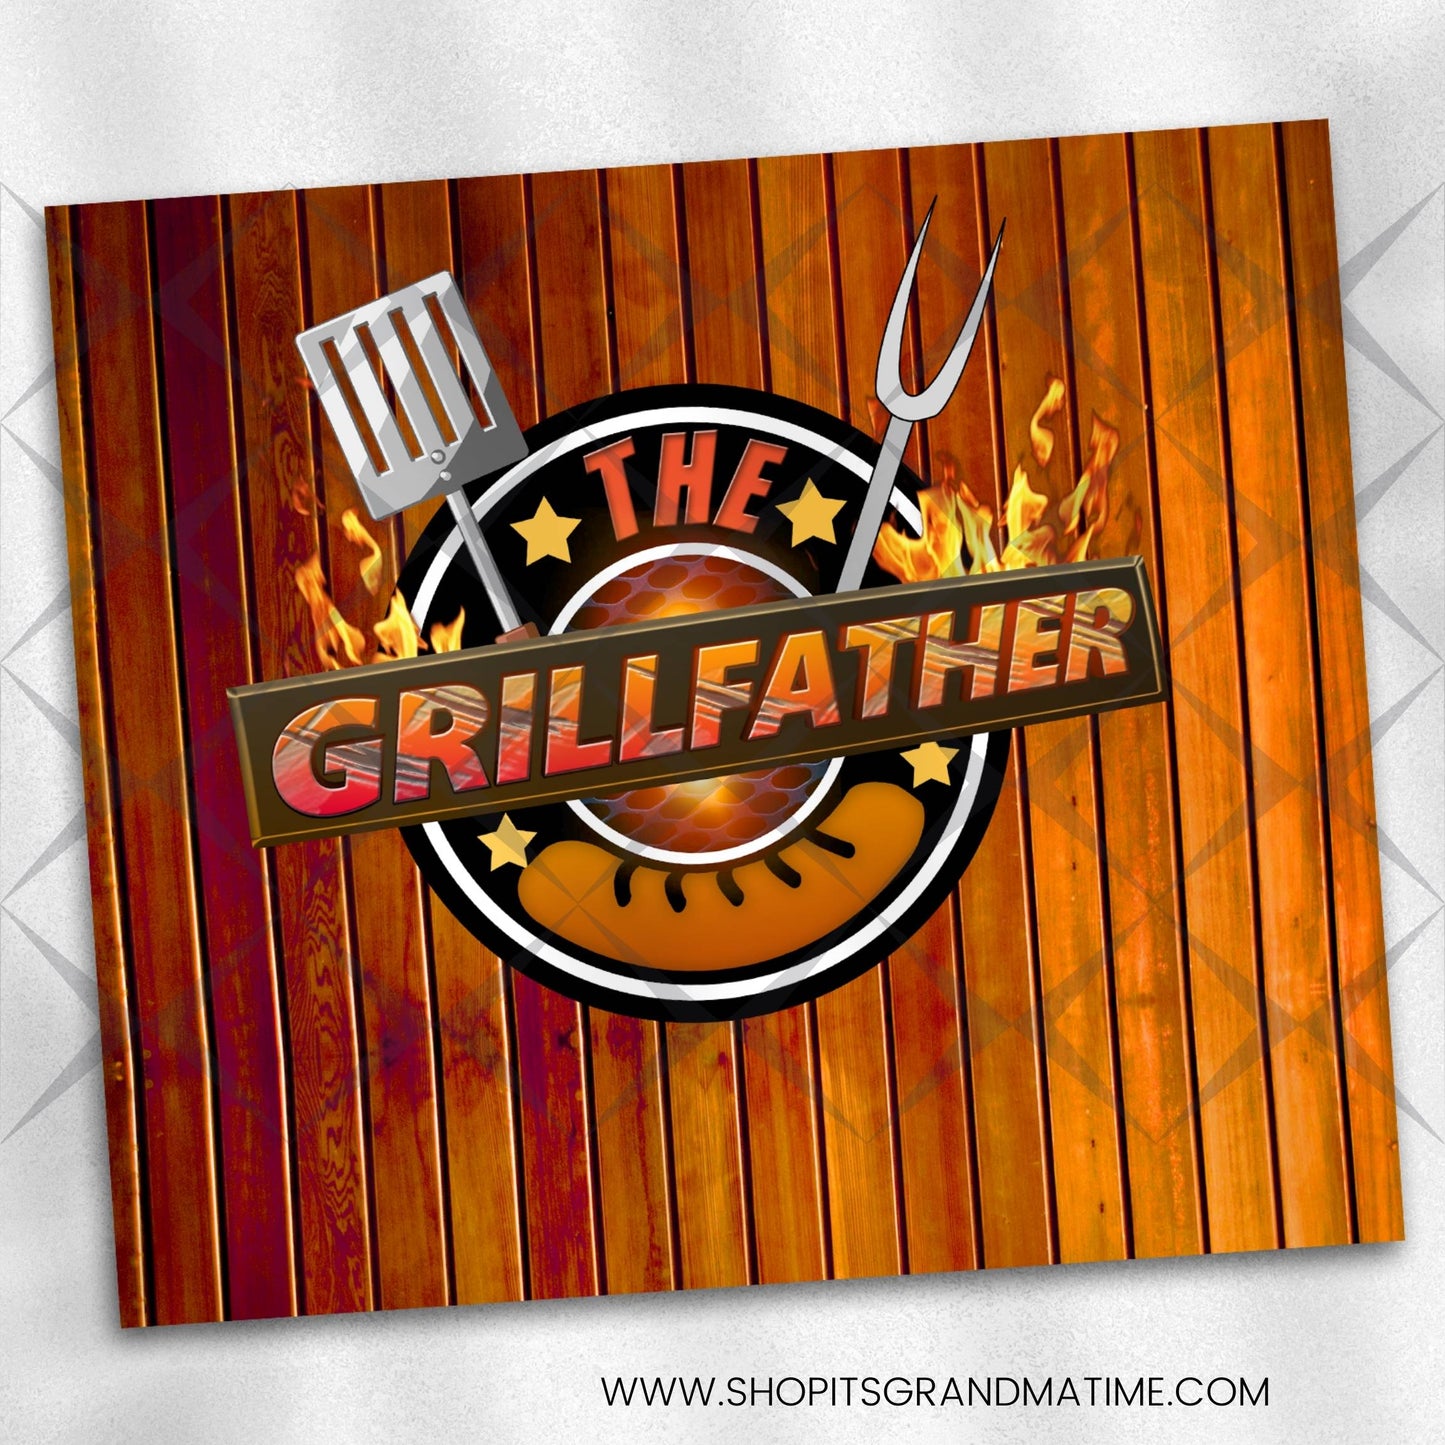 SUB1253 BBQ The GrillFather Tumbler Sublimation Transfer